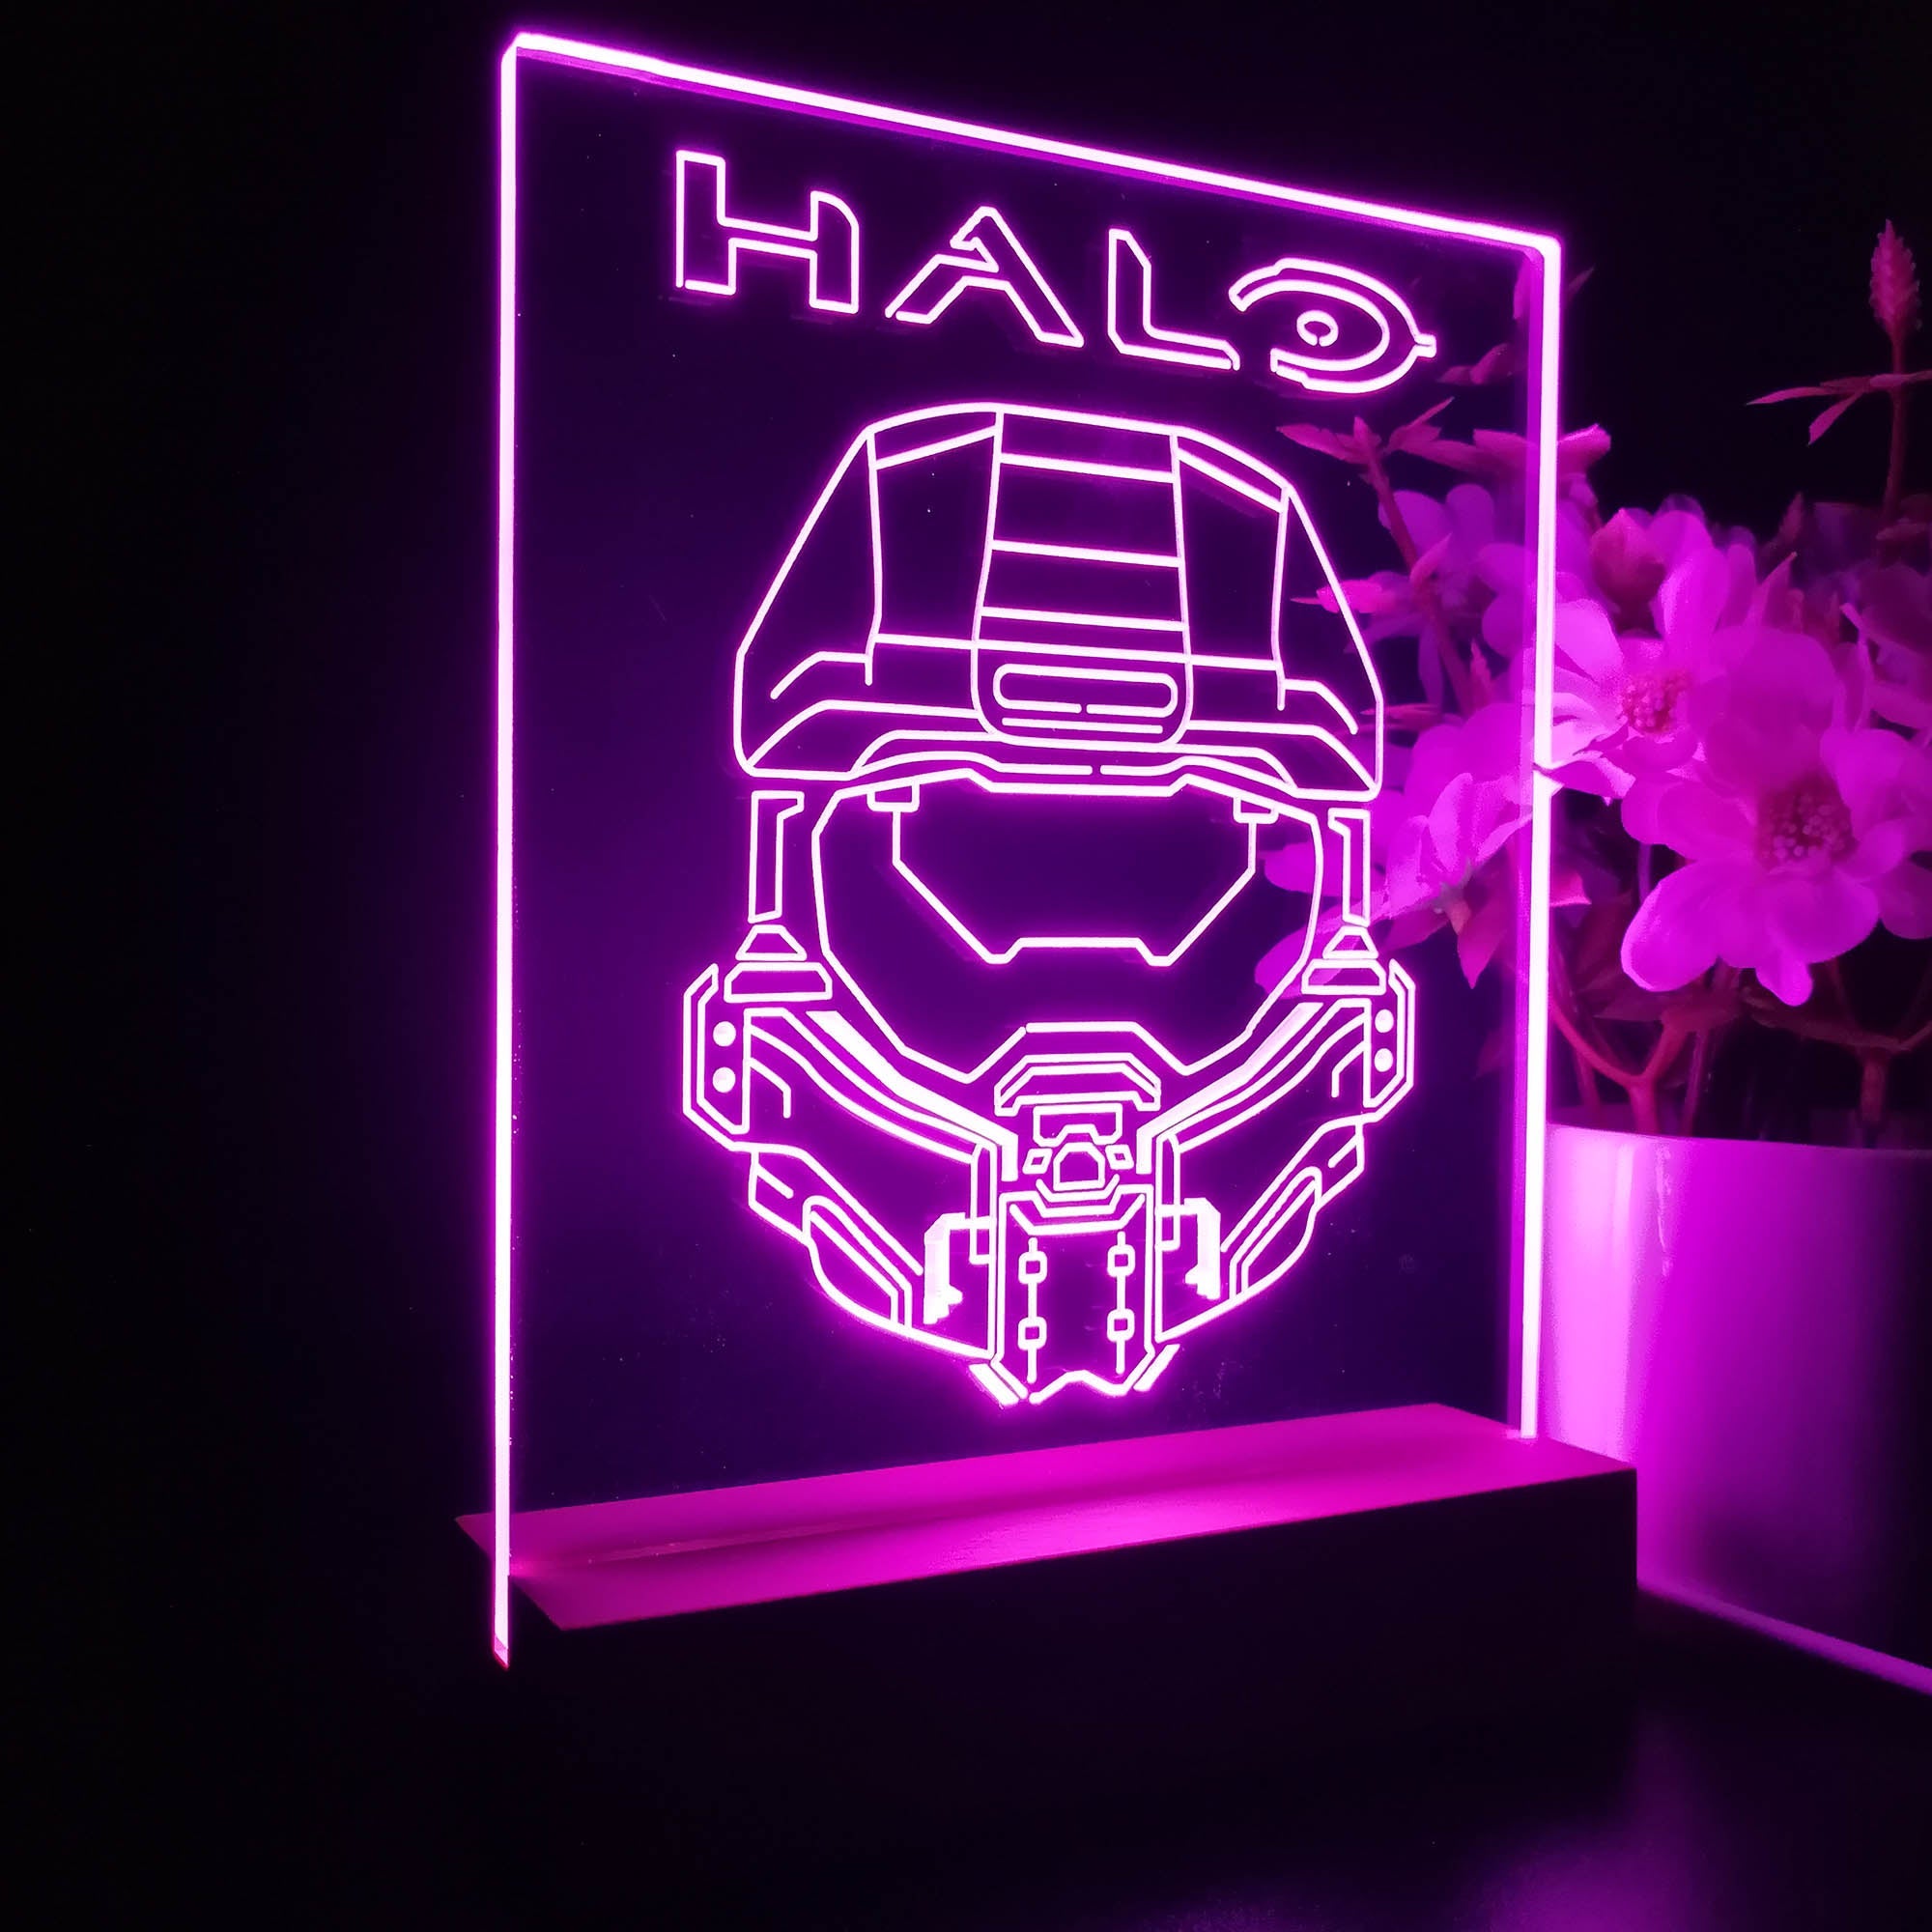 Halo Master Chief Game Room LED Sign Lamp Display